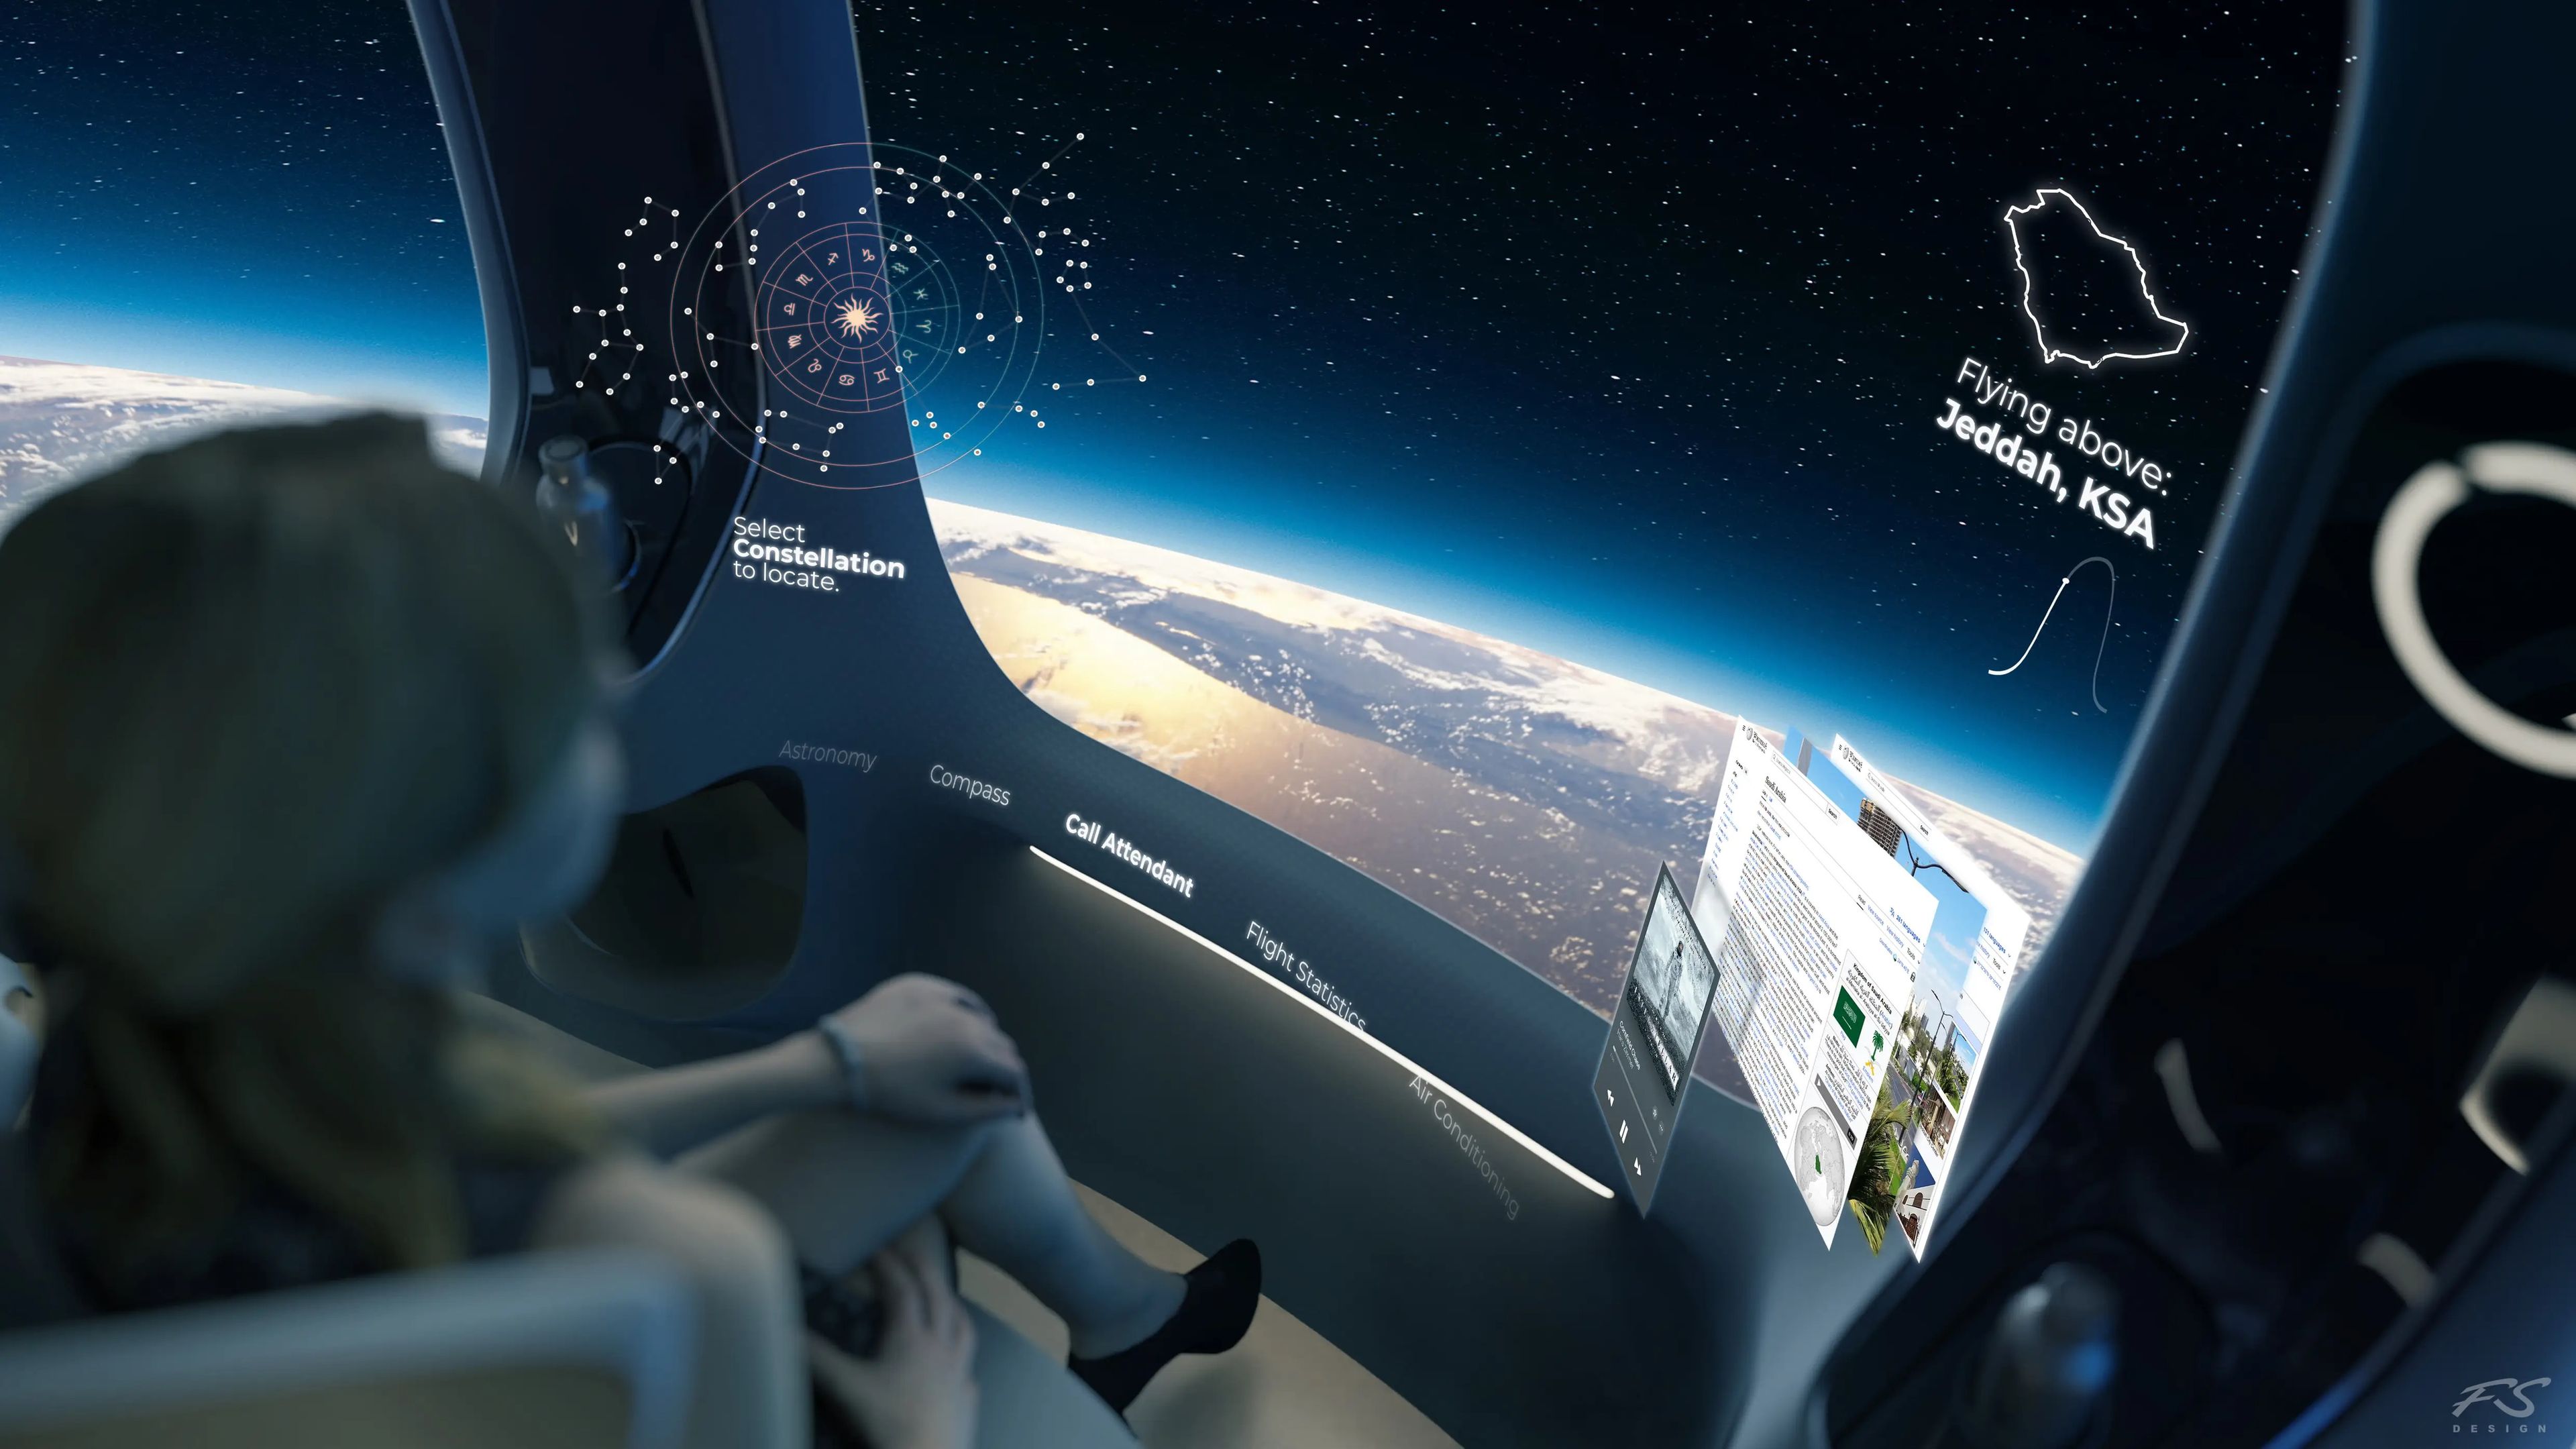 A generated image shows the concept for Halo Space's augmented reality features, with space in the background.